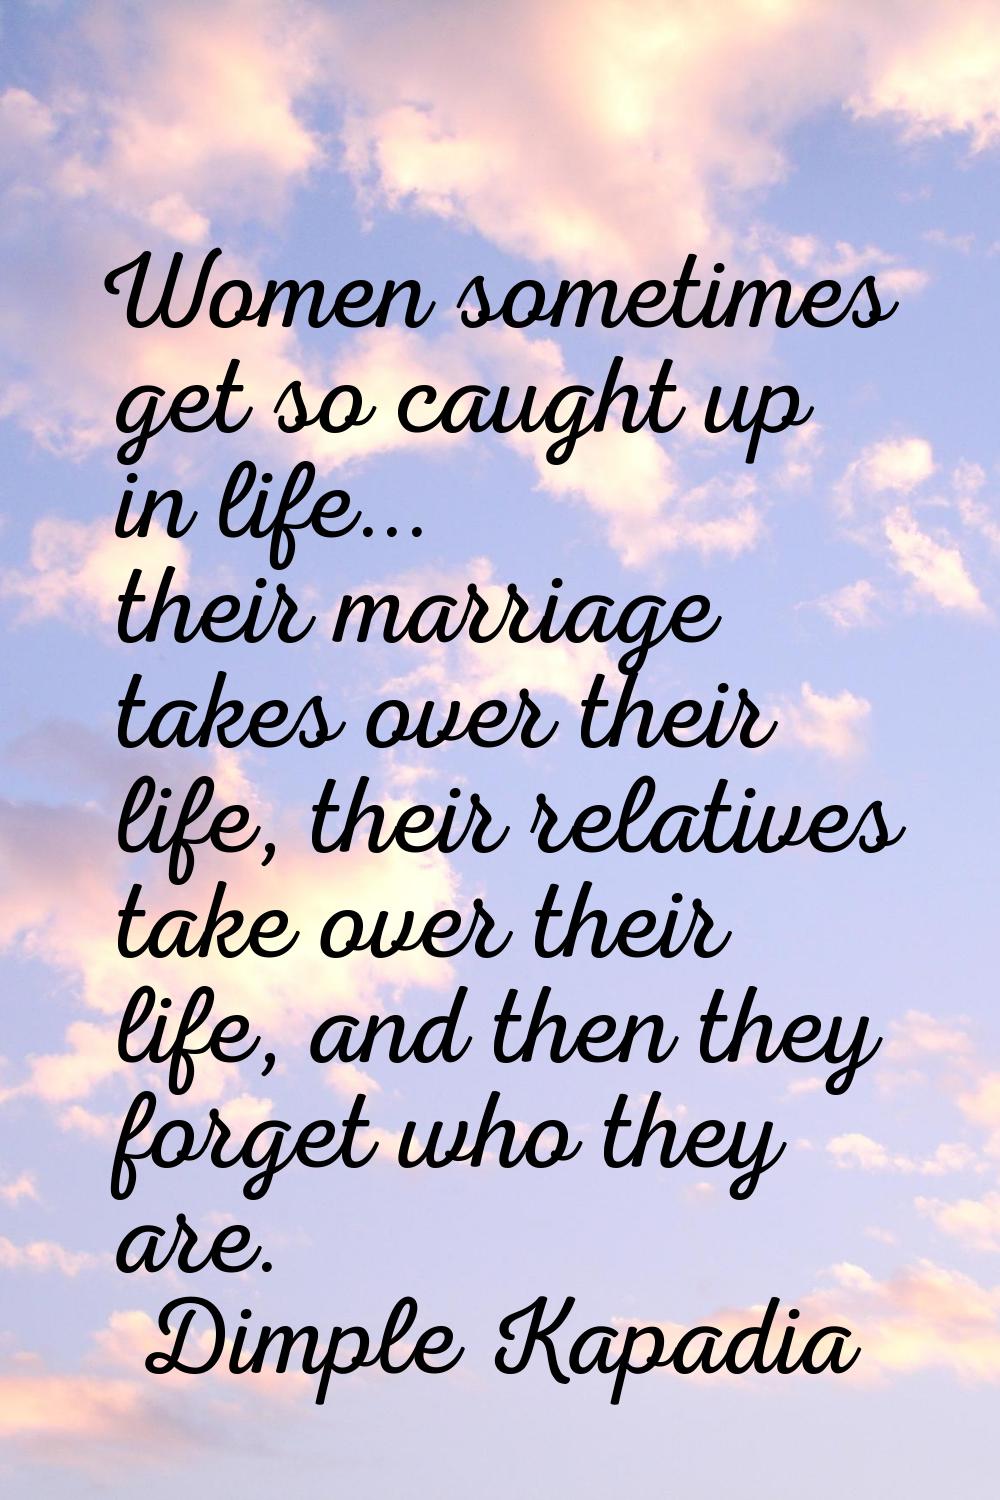 Women sometimes get so caught up in life... their marriage takes over their life, their relatives t